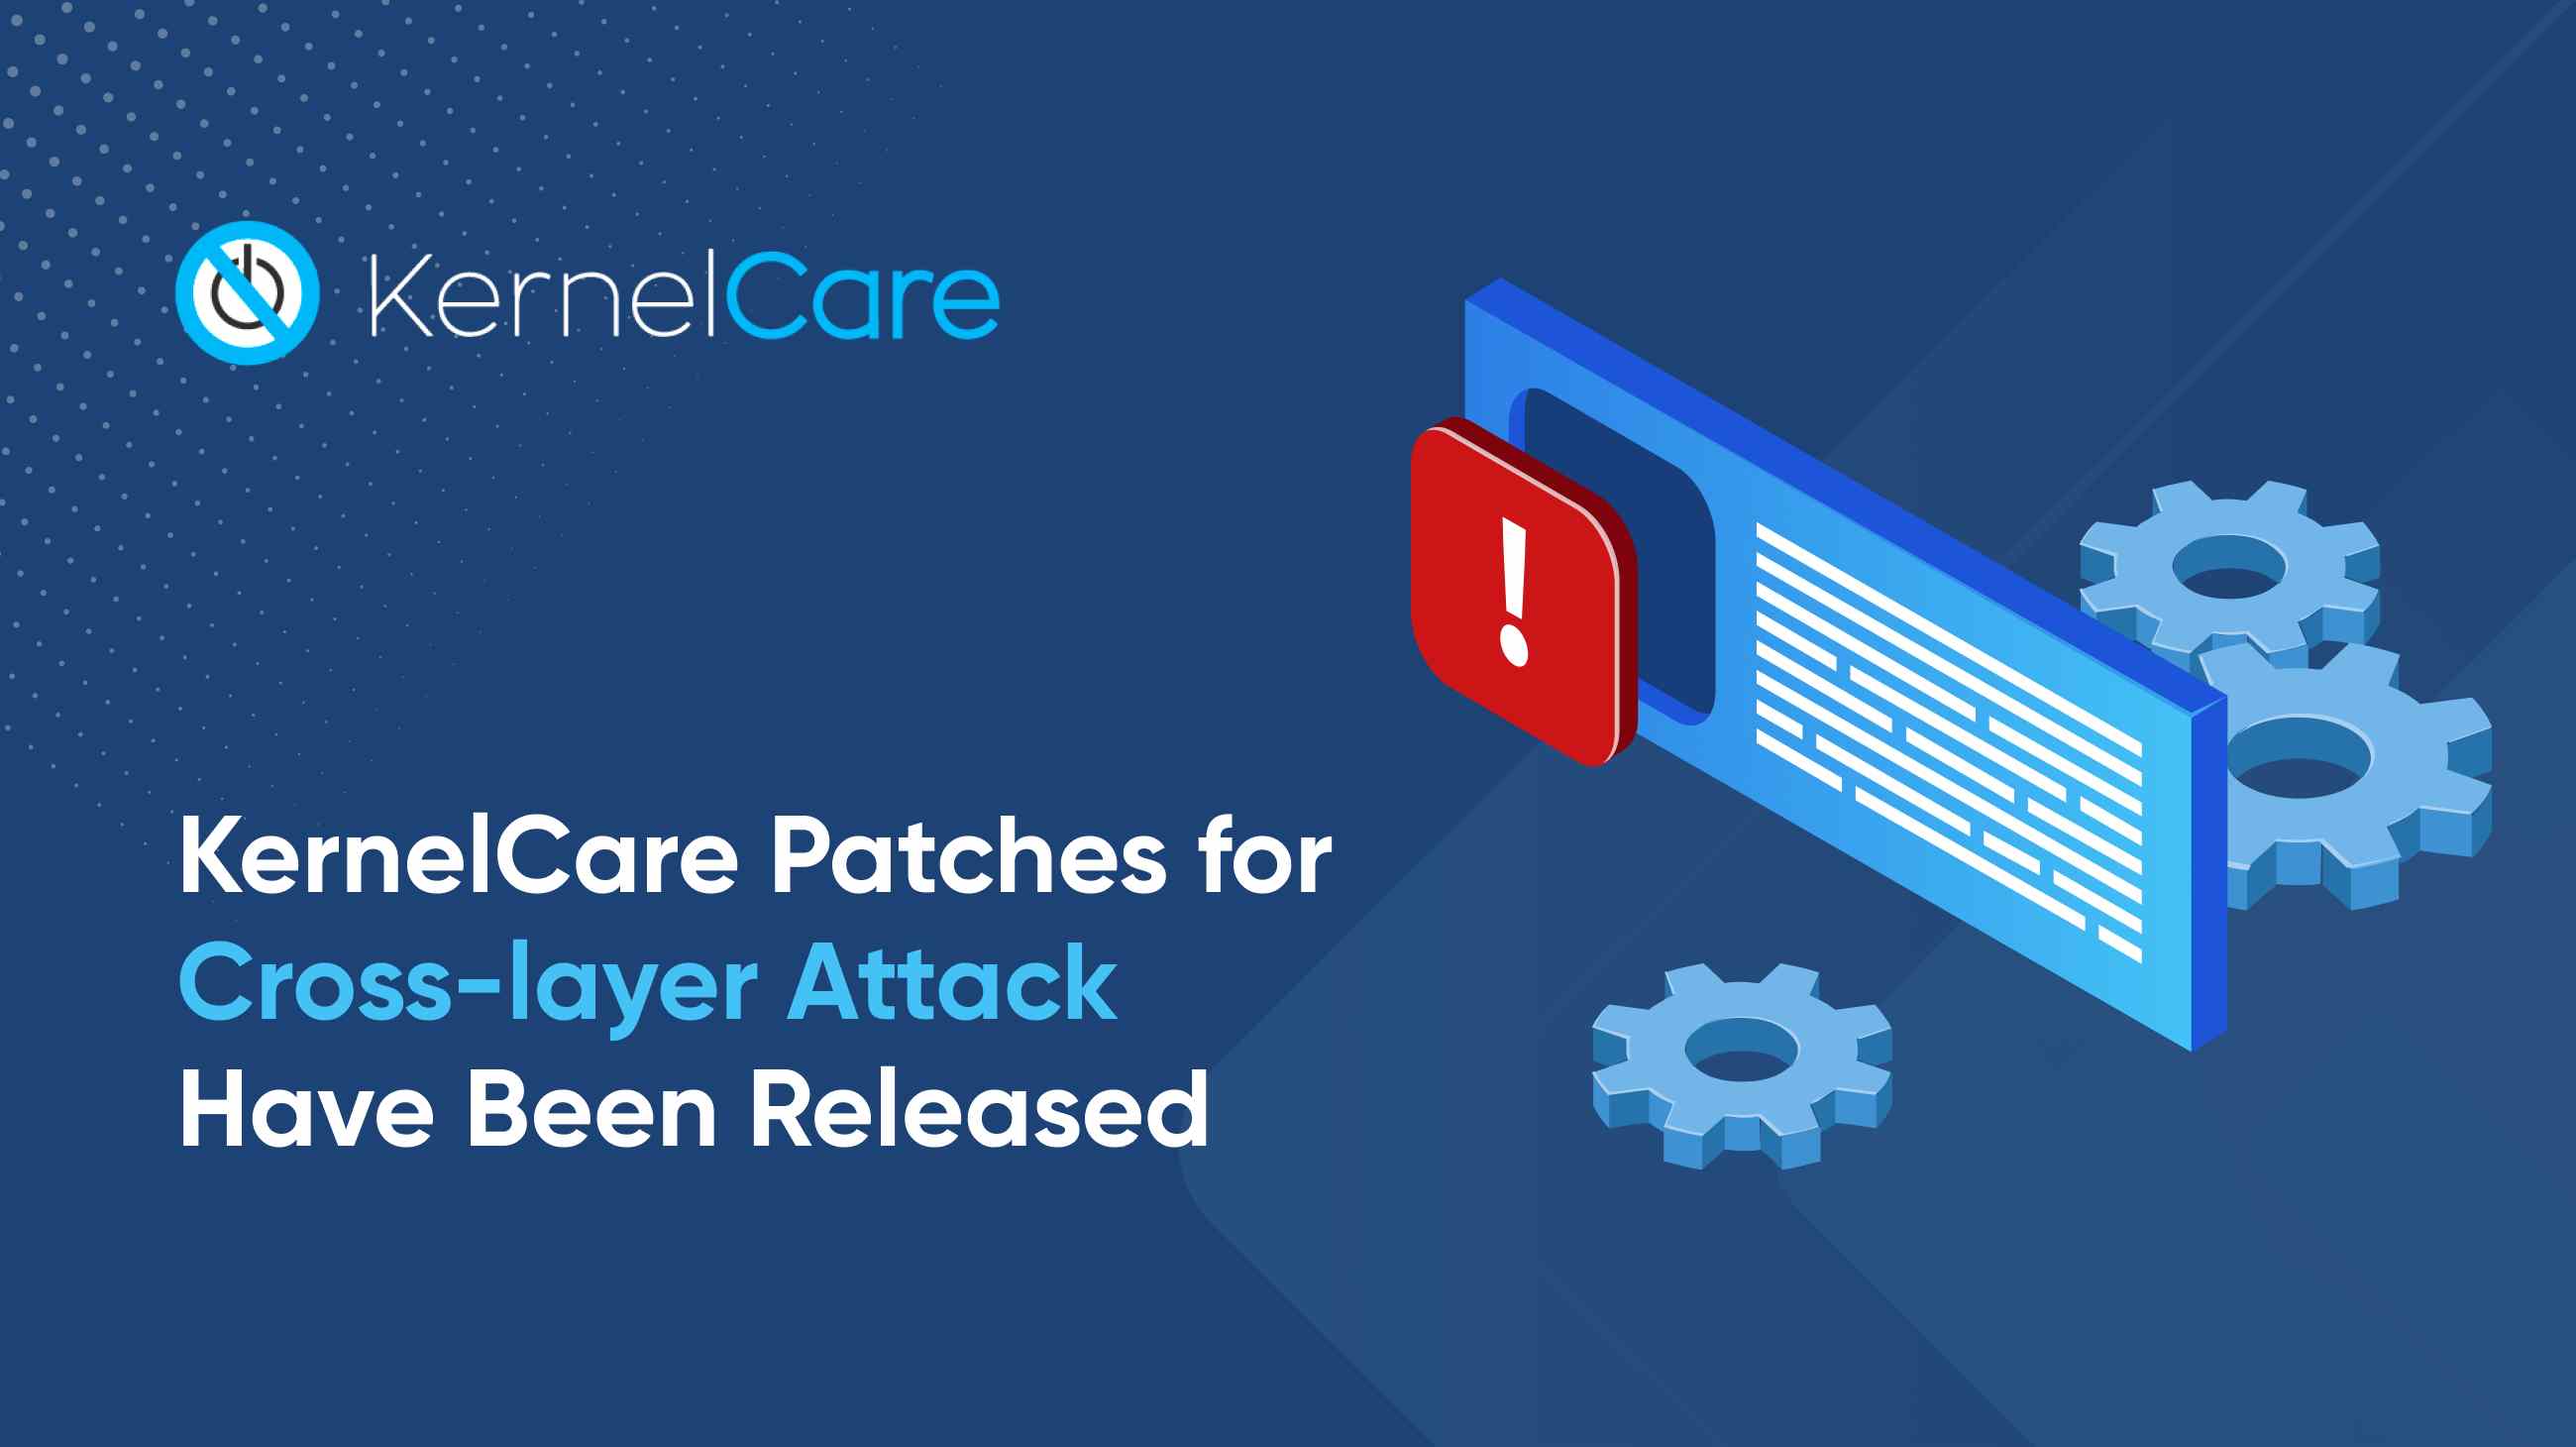 KernelCare Patches for Cross-layer Attack Have Been Released